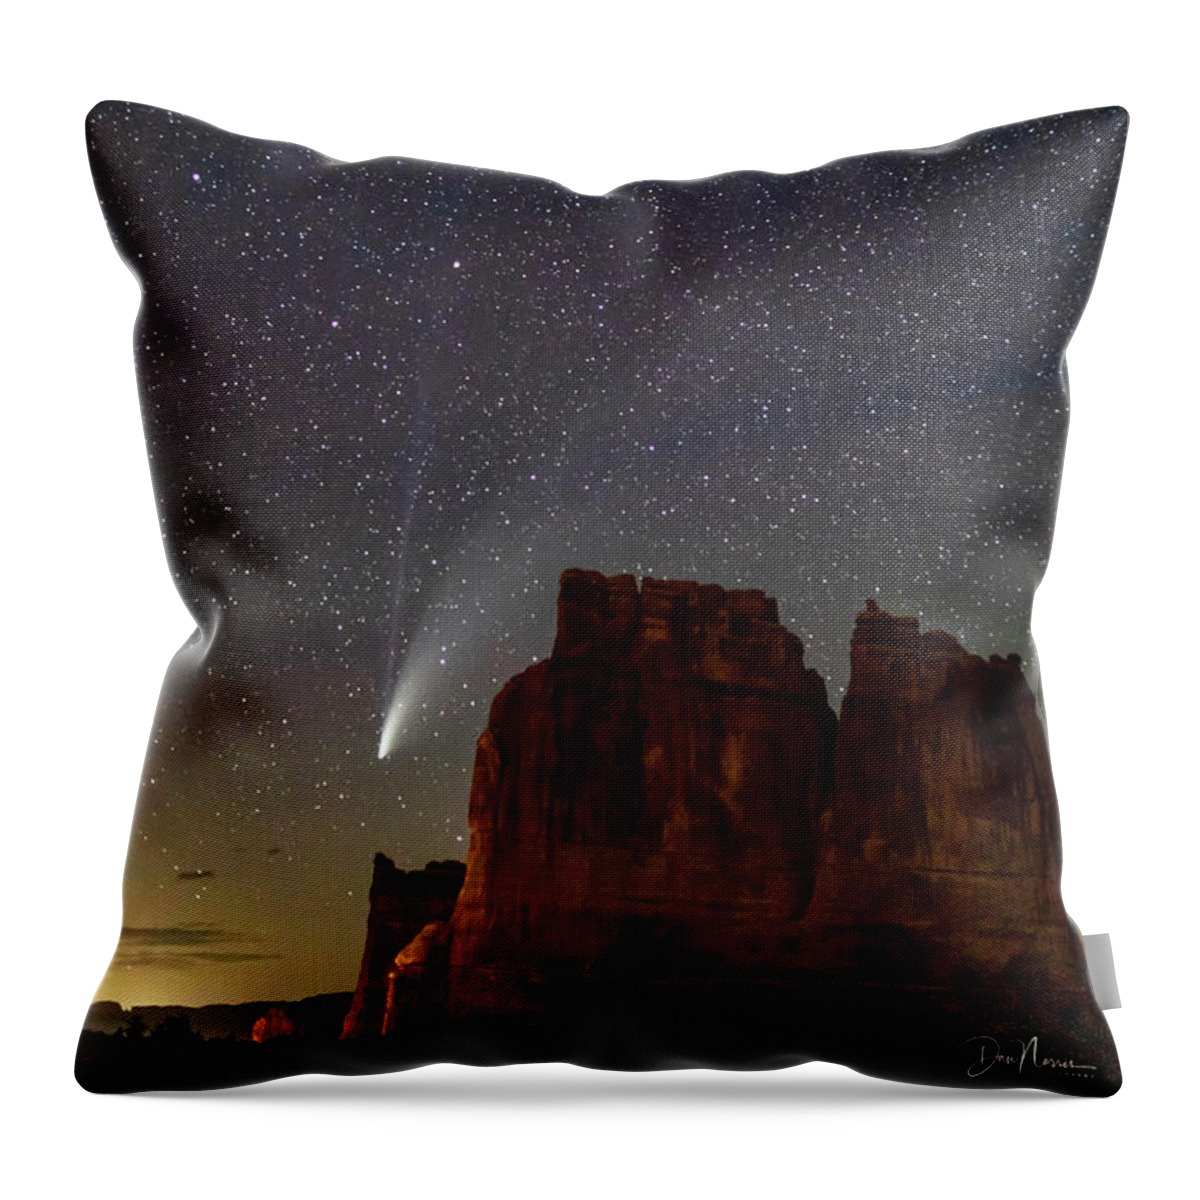 Moab Utah Night Comet Neowise Desert Colorado Plateau Throw Pillow featuring the photograph Comet NEOWISE and The Big Dipper by Dan Norris